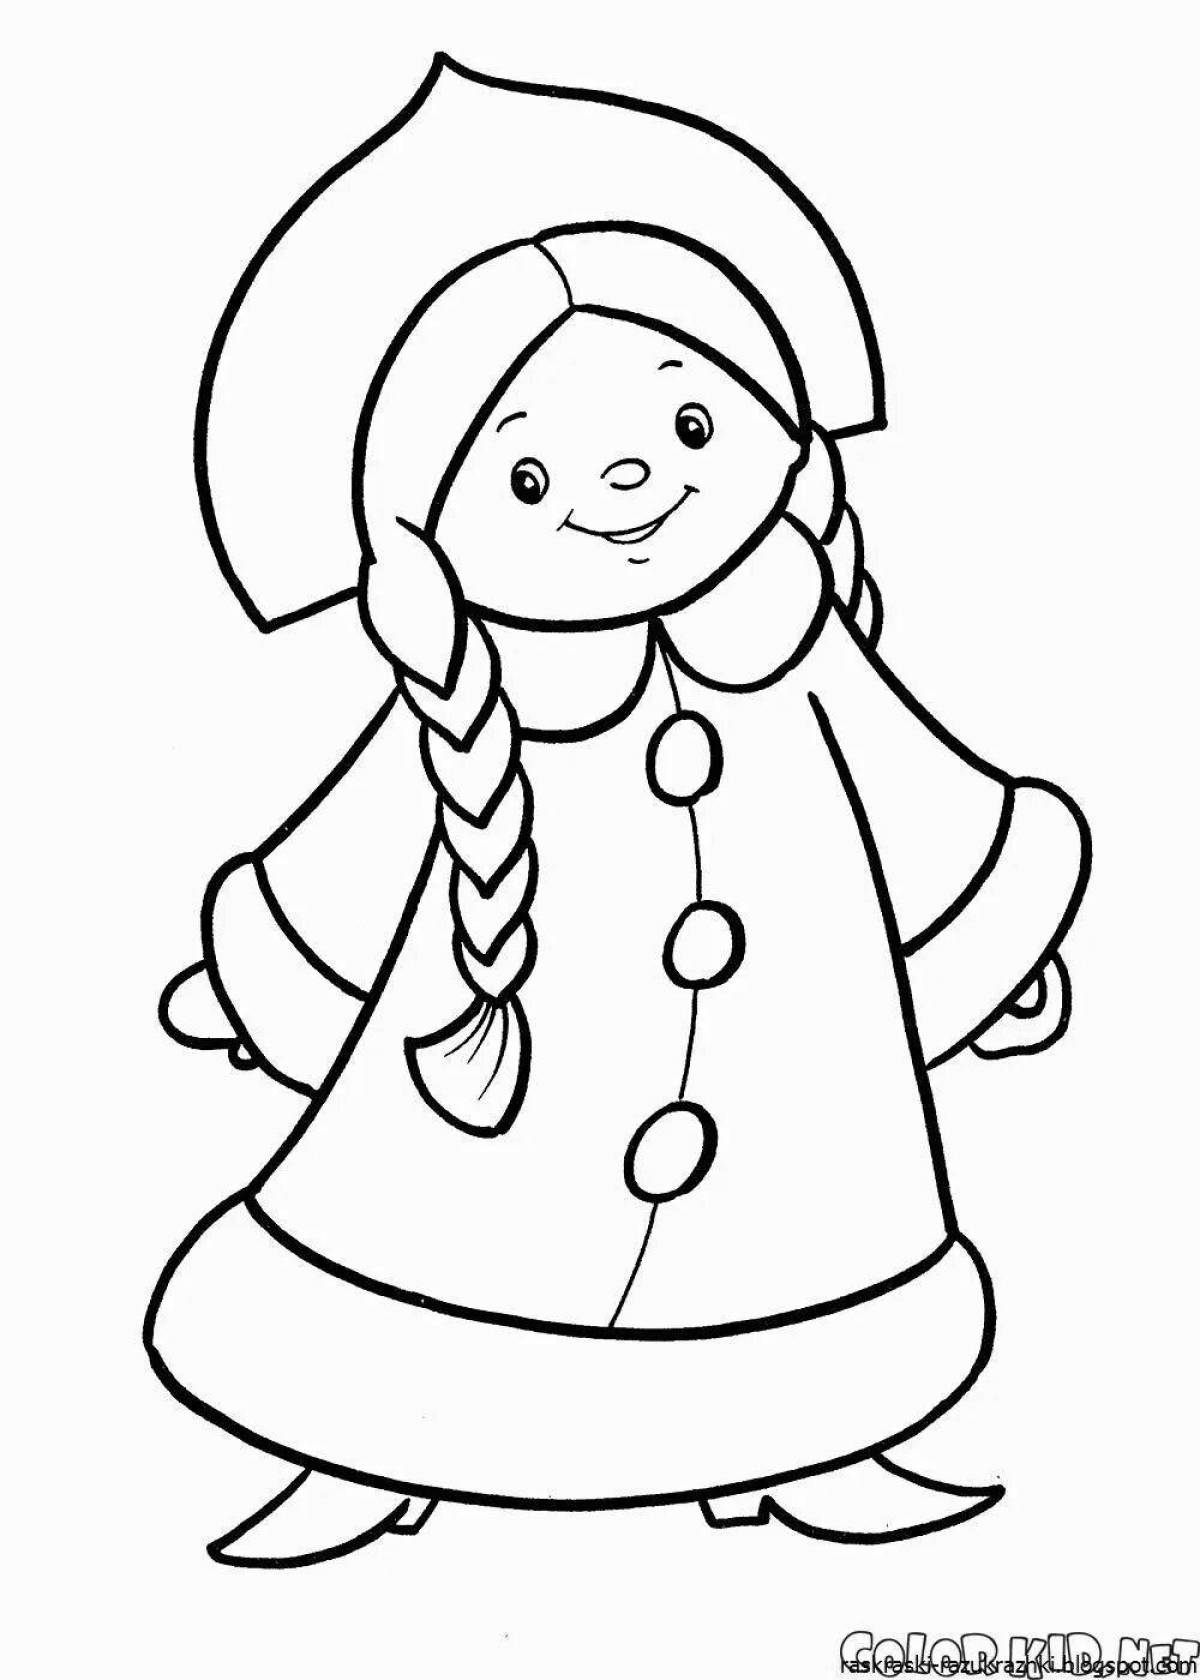 Colorful coloring of the snow maiden